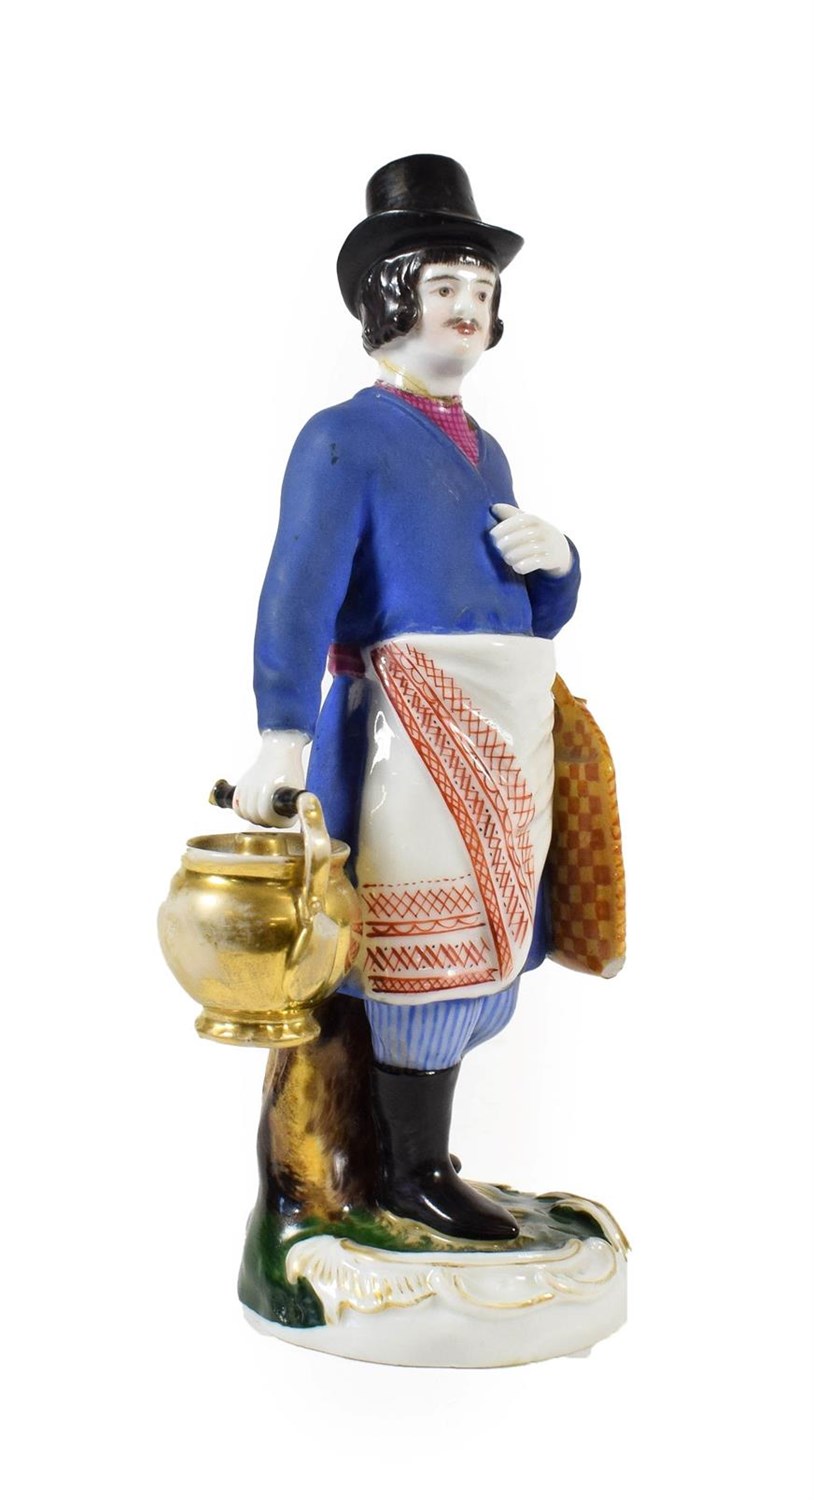 Lot 58 - A Gardner Porcelain Figure of a Sbiten Vendor, early 19th century, standing wearing a black top...